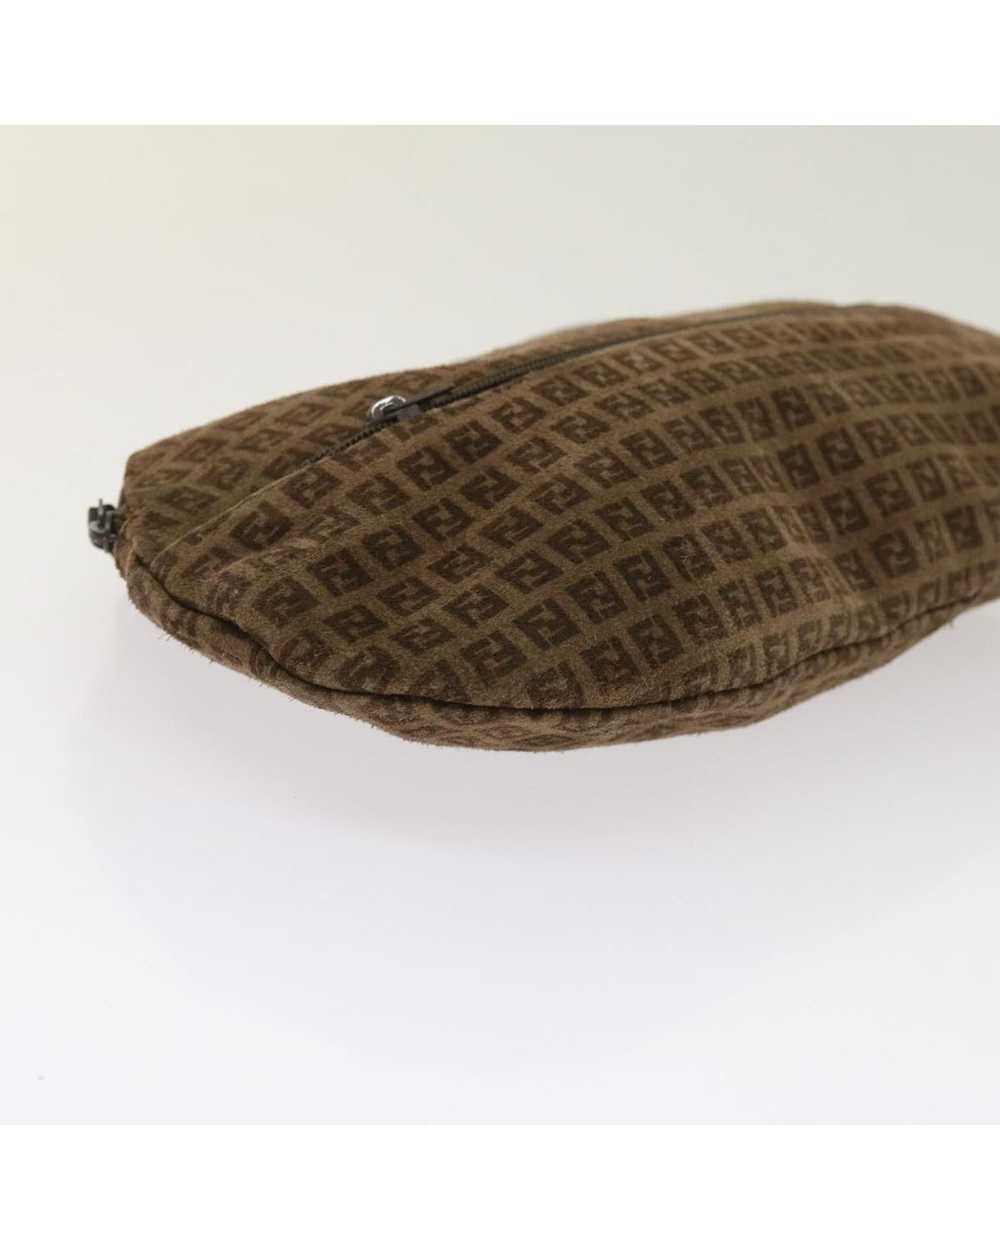 Fendi Exquisite Brown Suede Accessory with Metal … - image 9